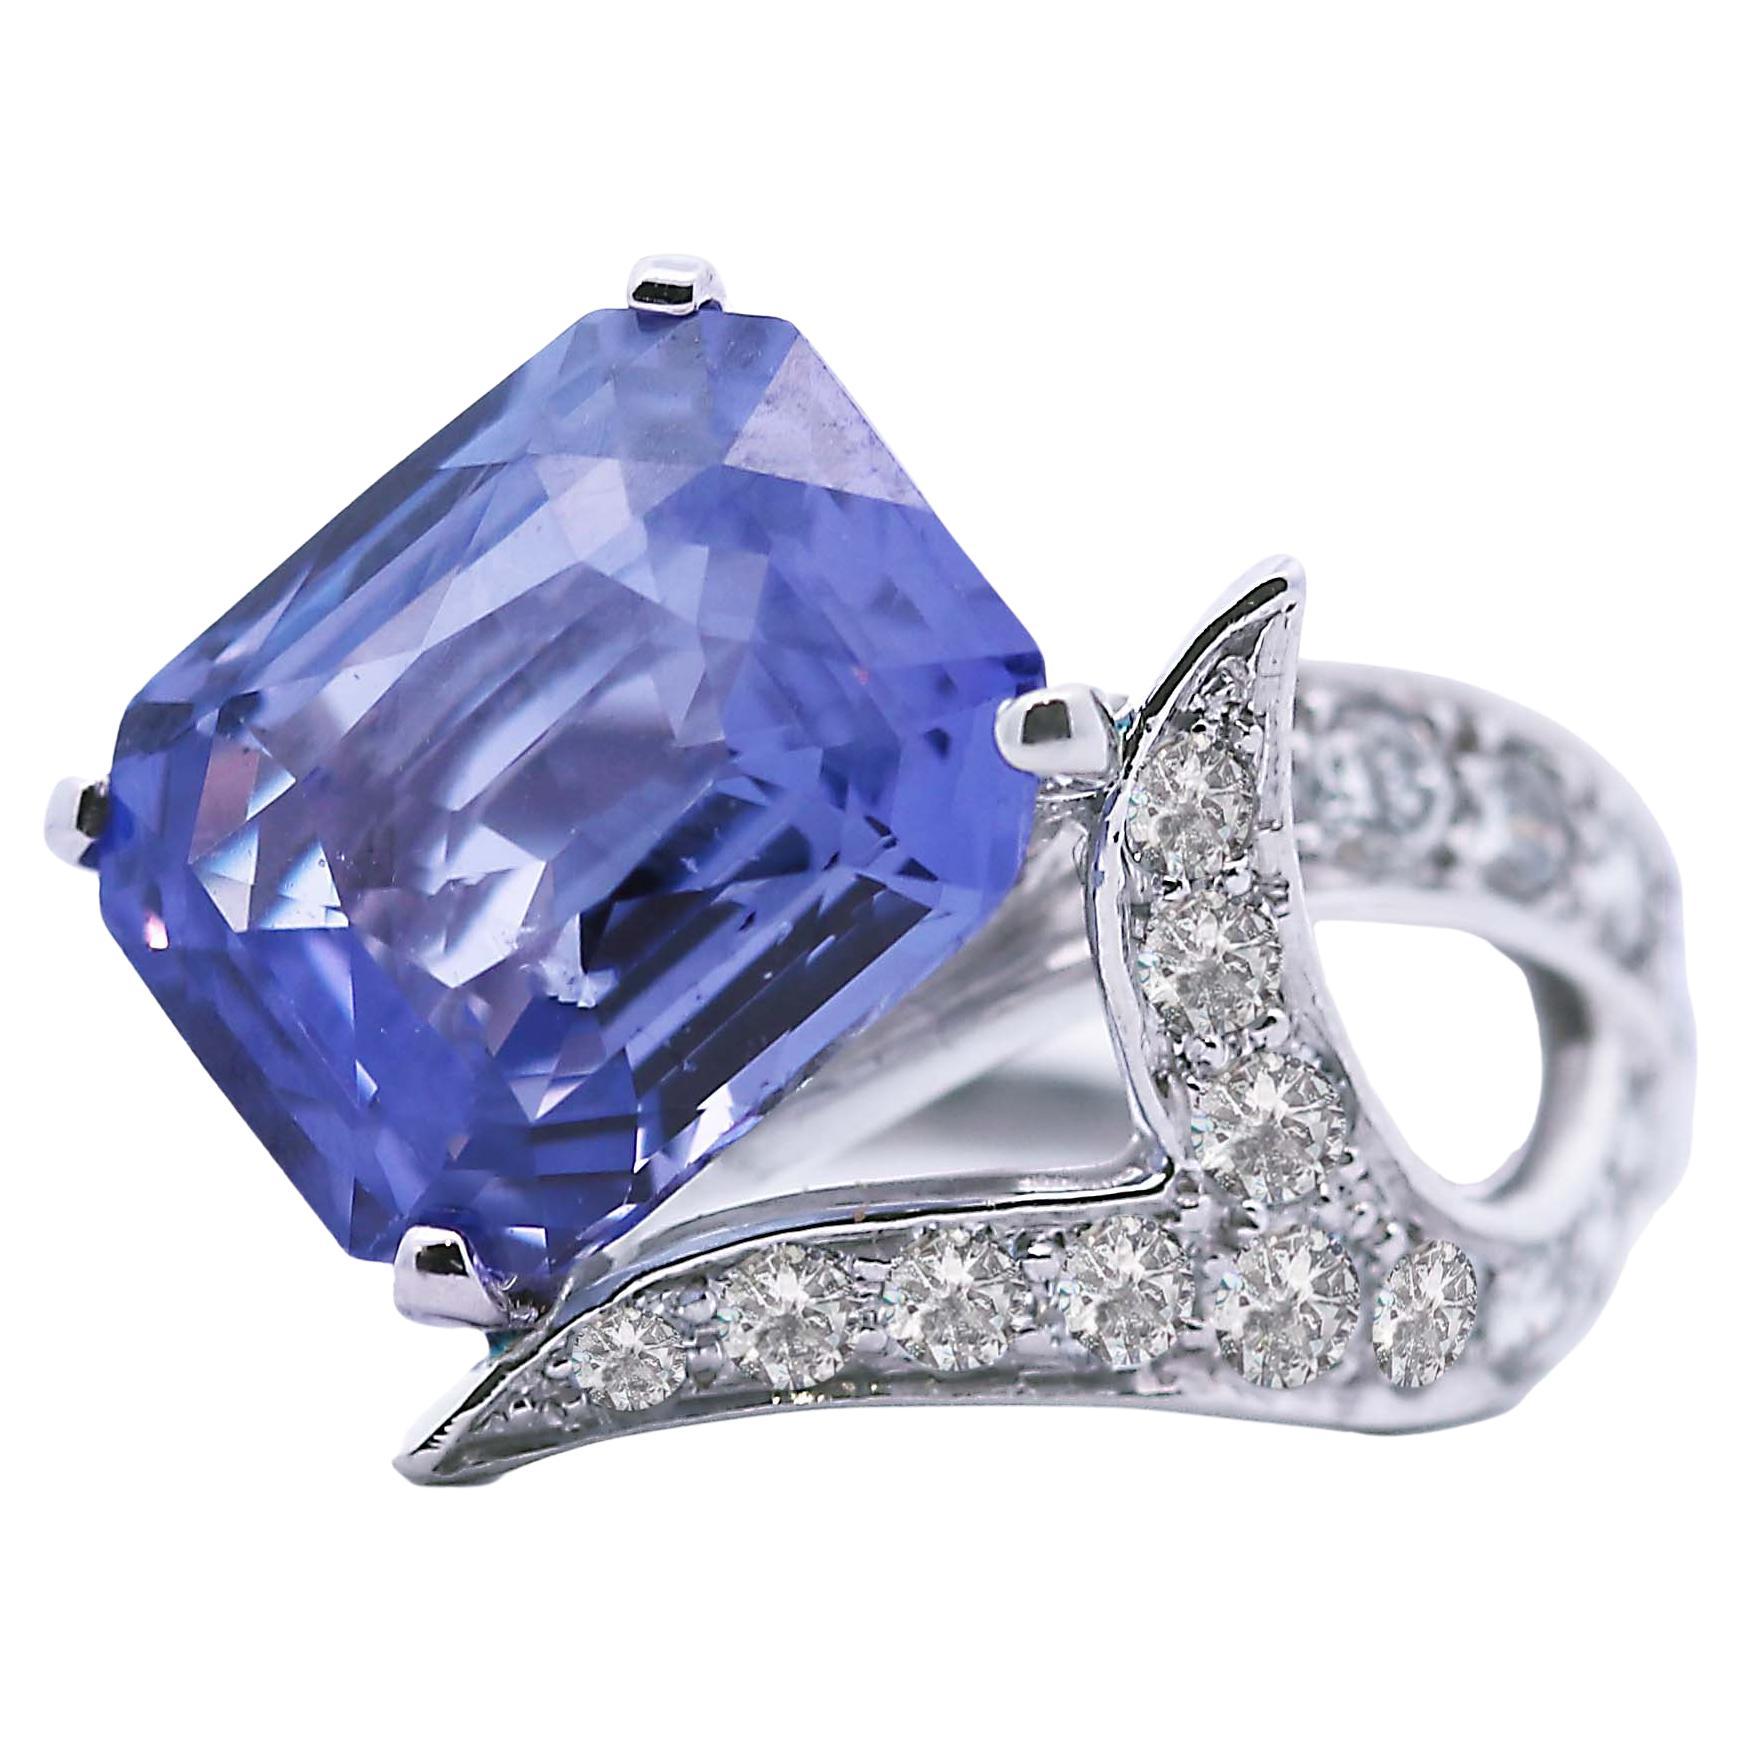 What is the rarest color of sapphire?